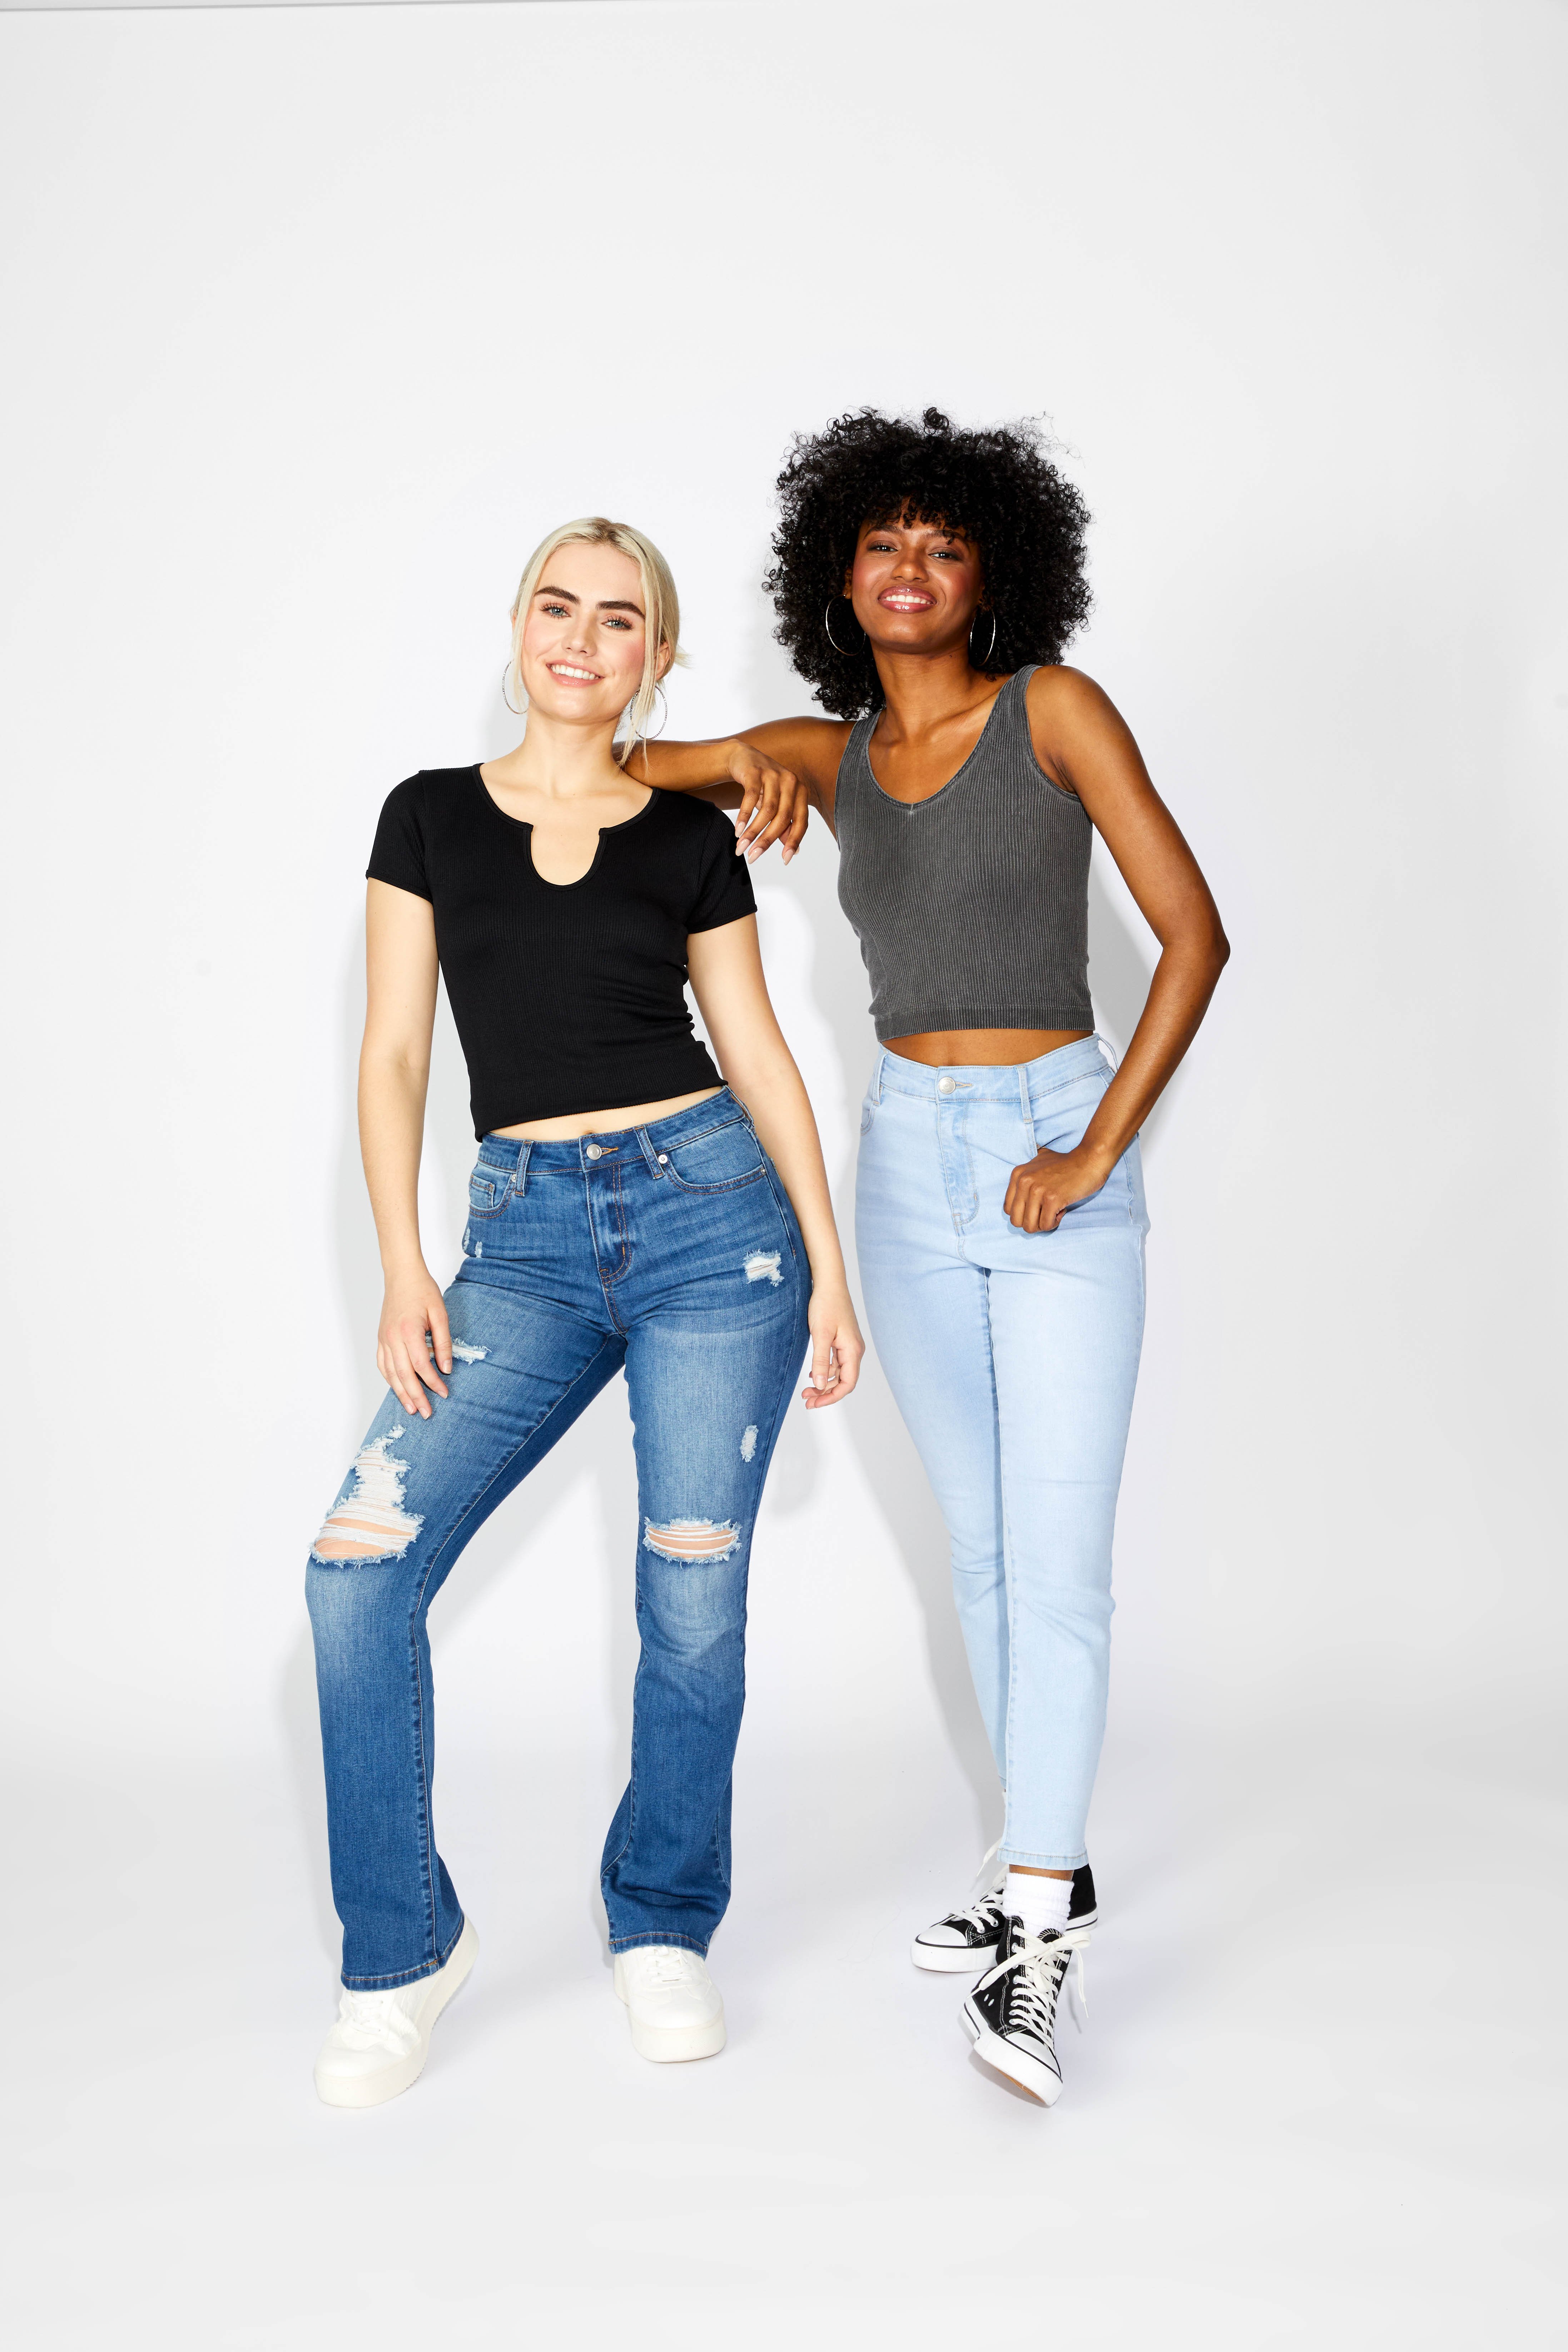 Two female models wearing jeans and crop tops from rue21